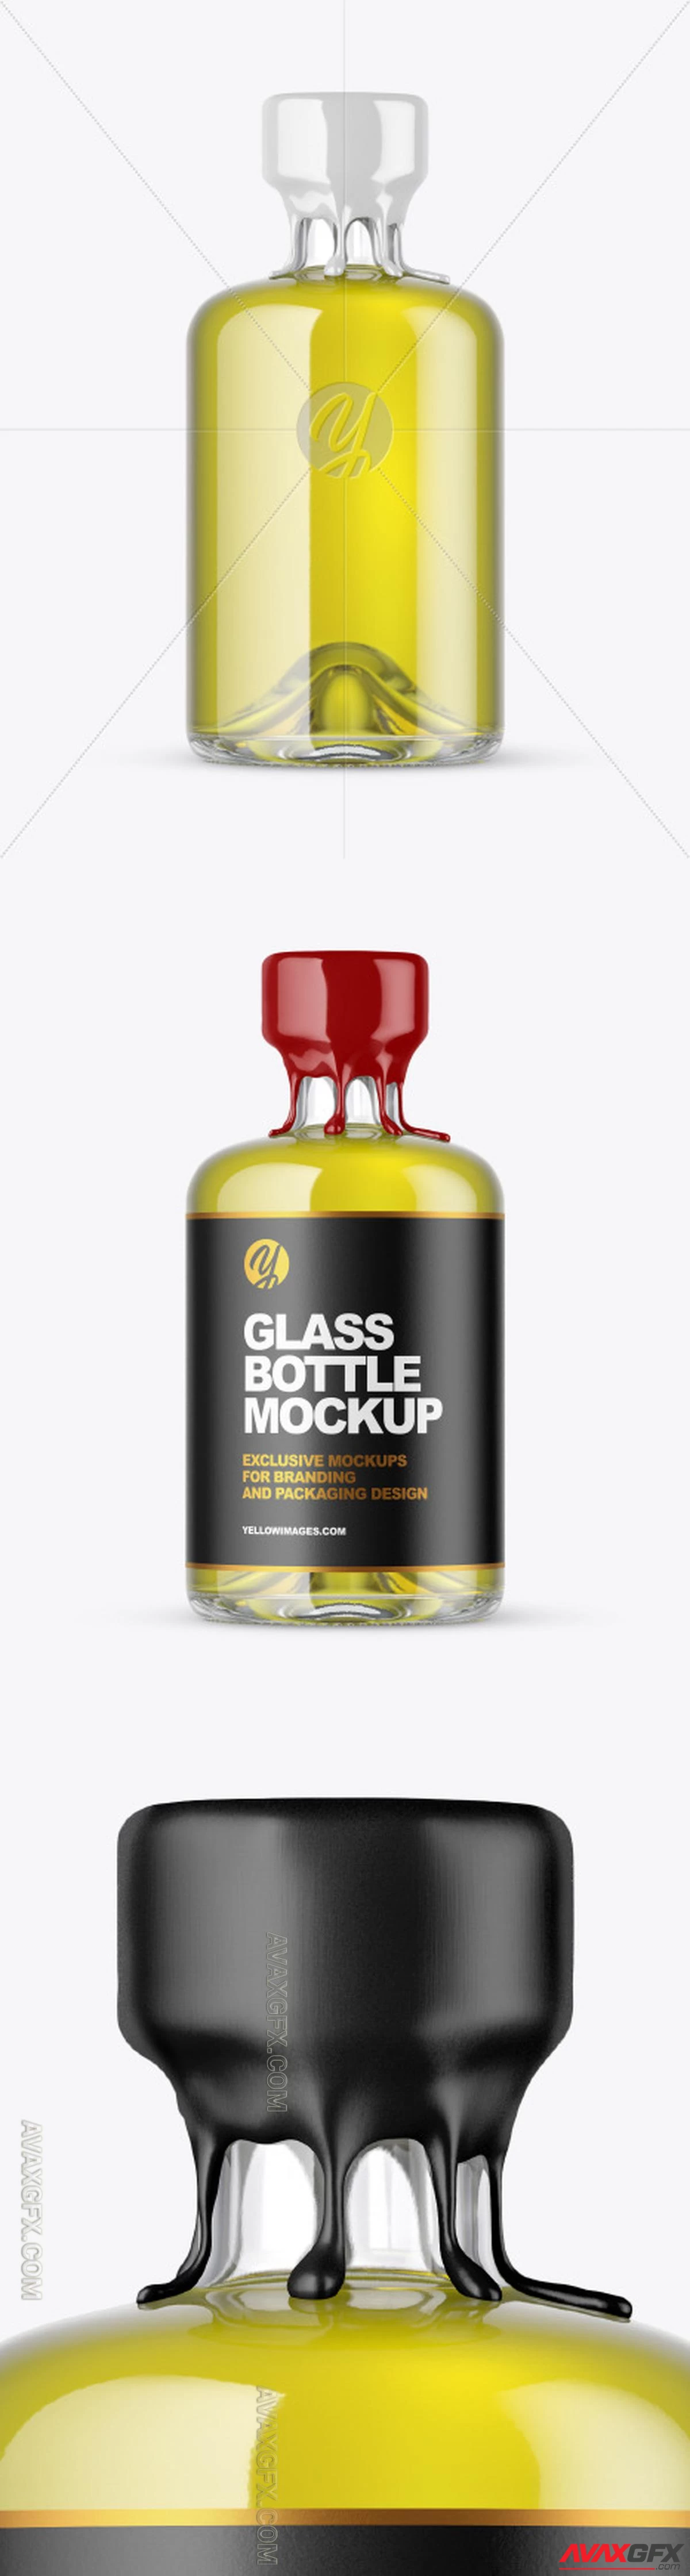 Clear Glass Oil Bottle with Wax Mockup 48731